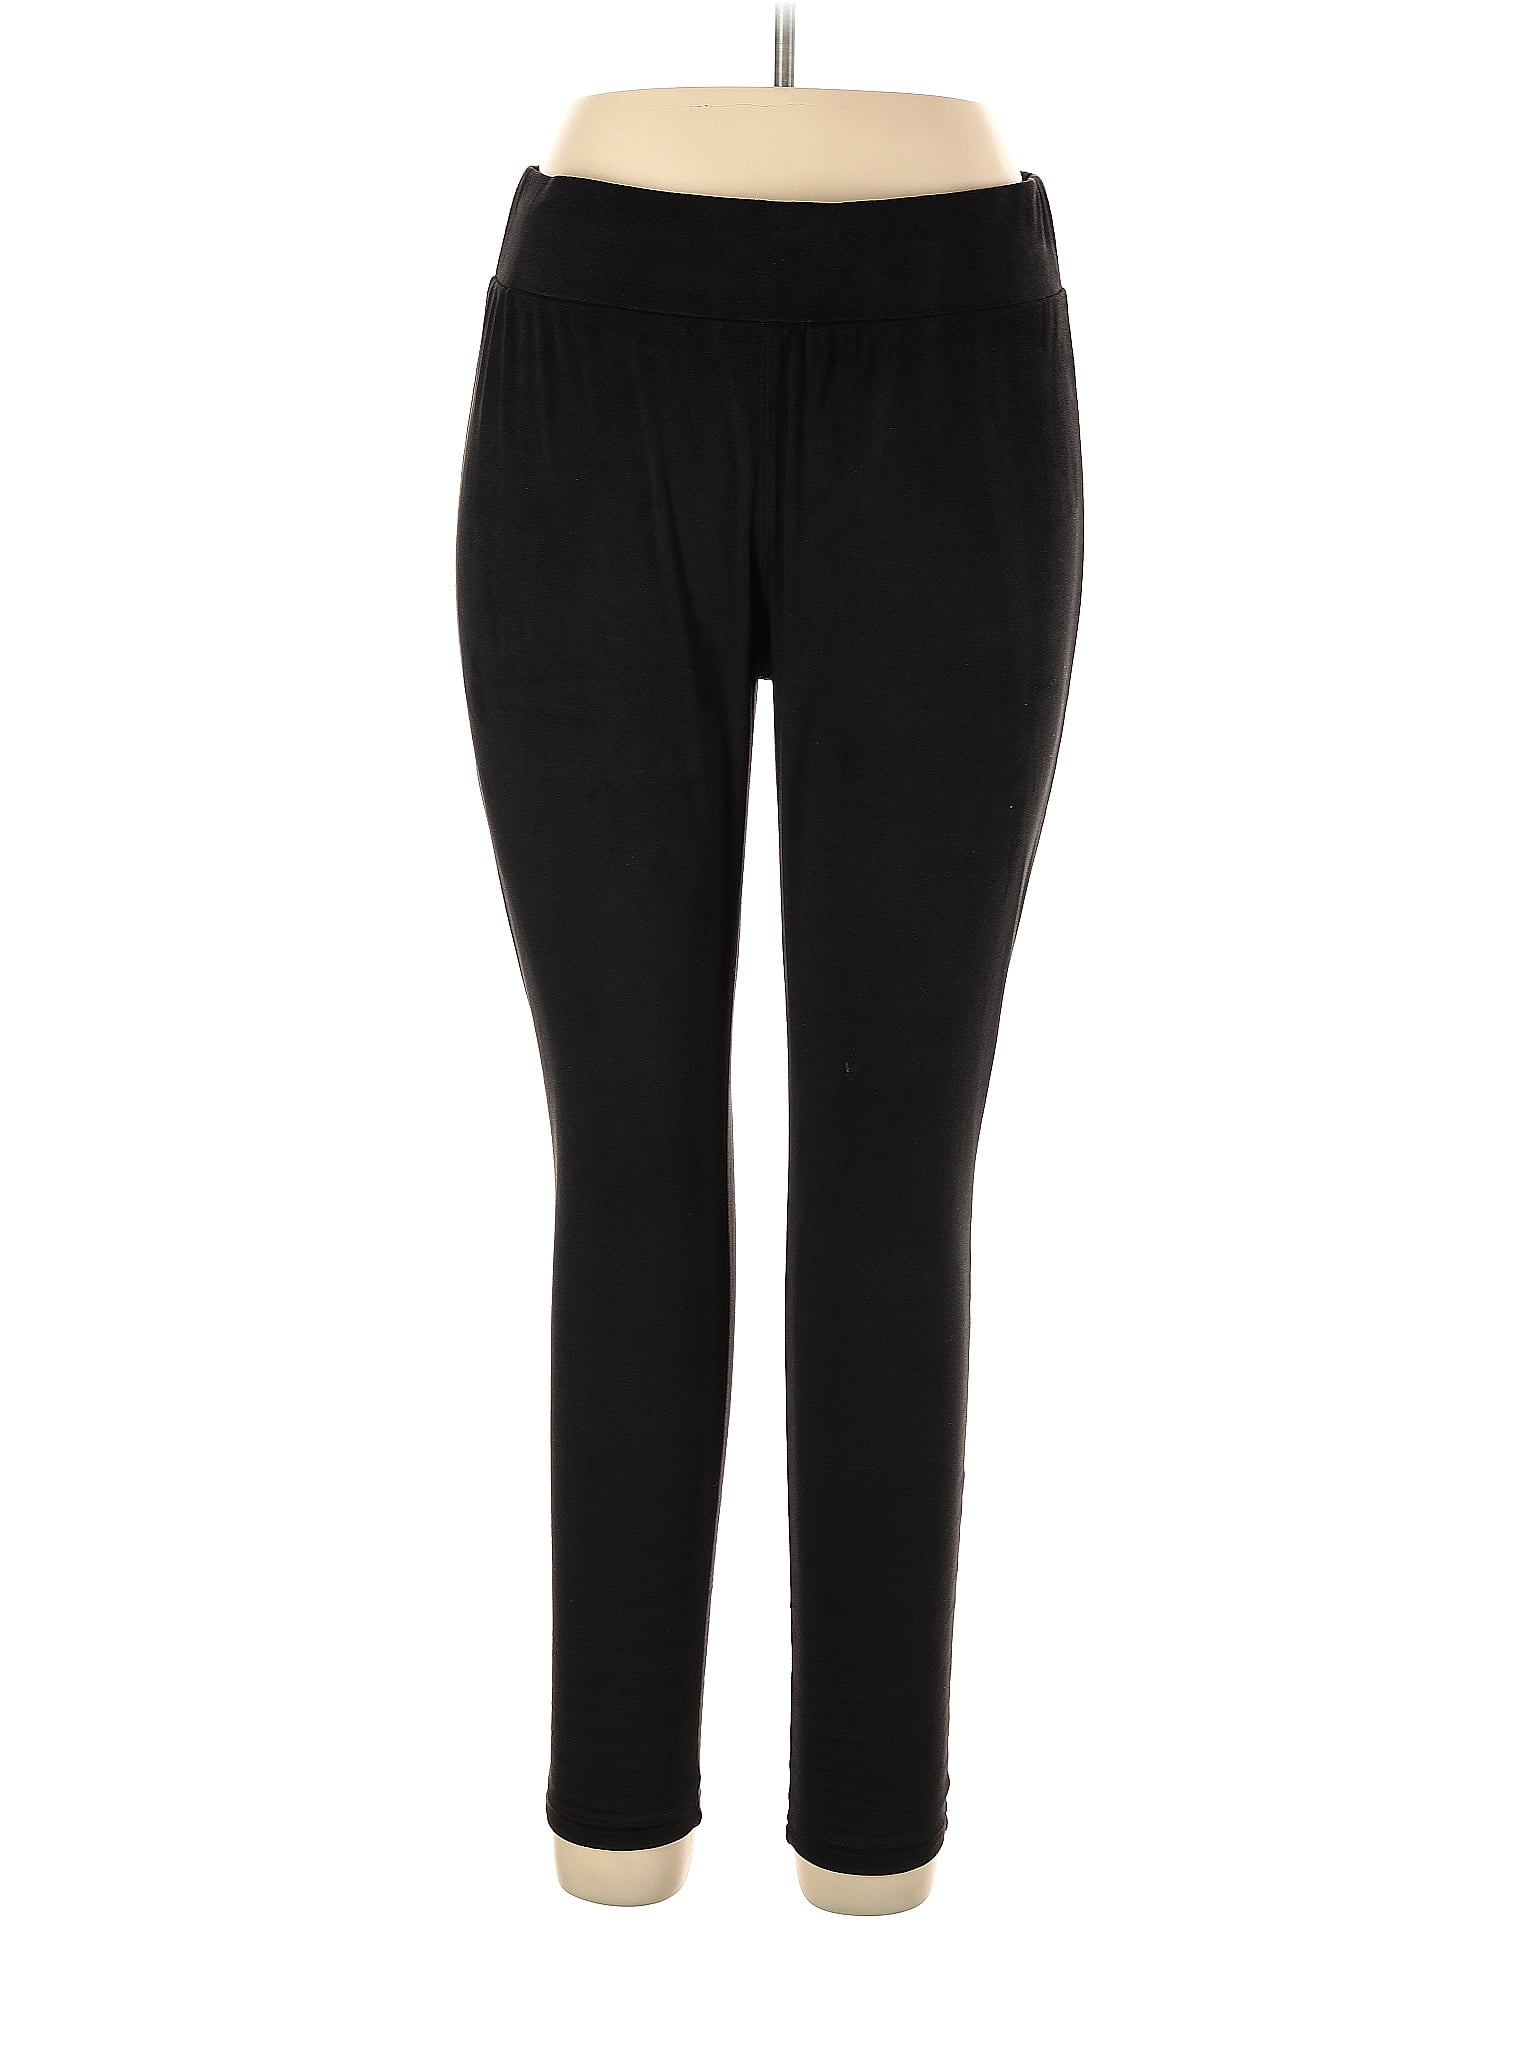 Nordstrom Black Casual Pants Size XL - 72% off